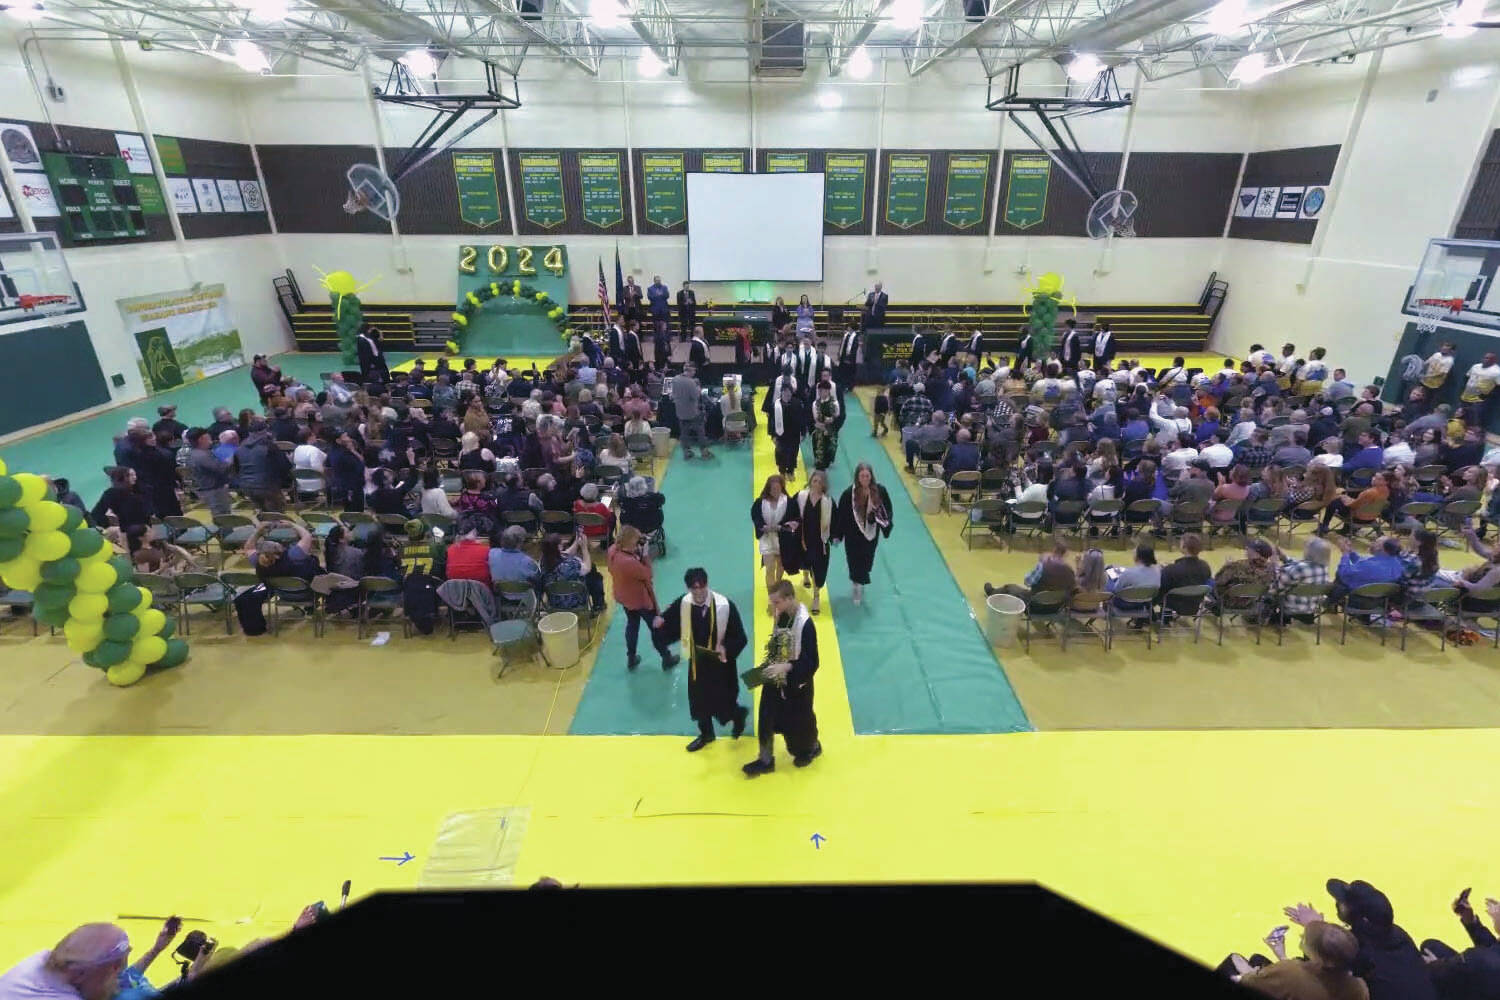 Screenshot
Graduates of Seward High School leave the gym at the end of their graduation ceremony on Wednesday.